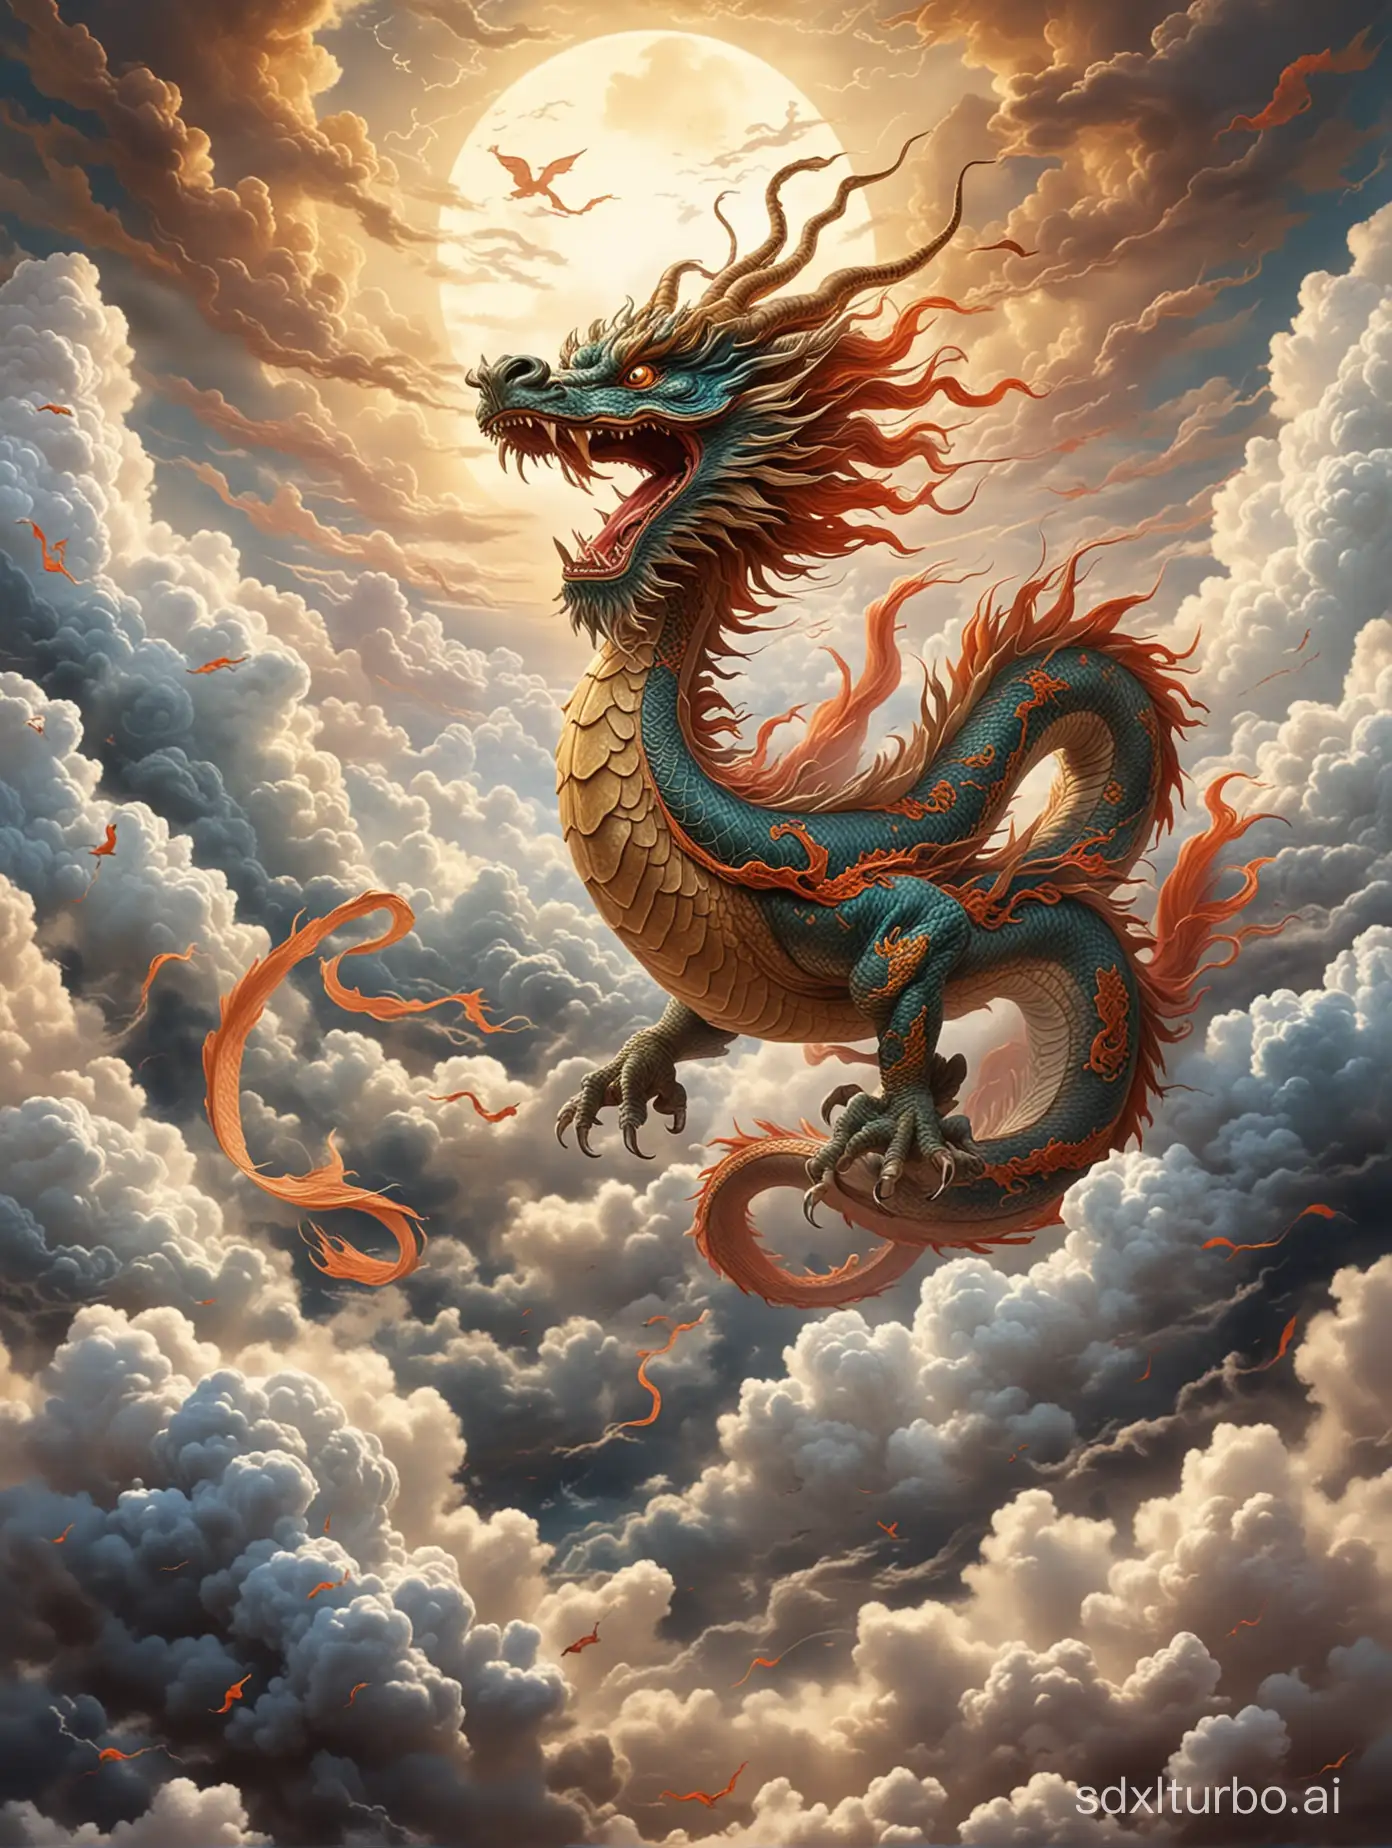 The Chinese dragon soars and rides the clouds
Achieve the highest rank in the examination